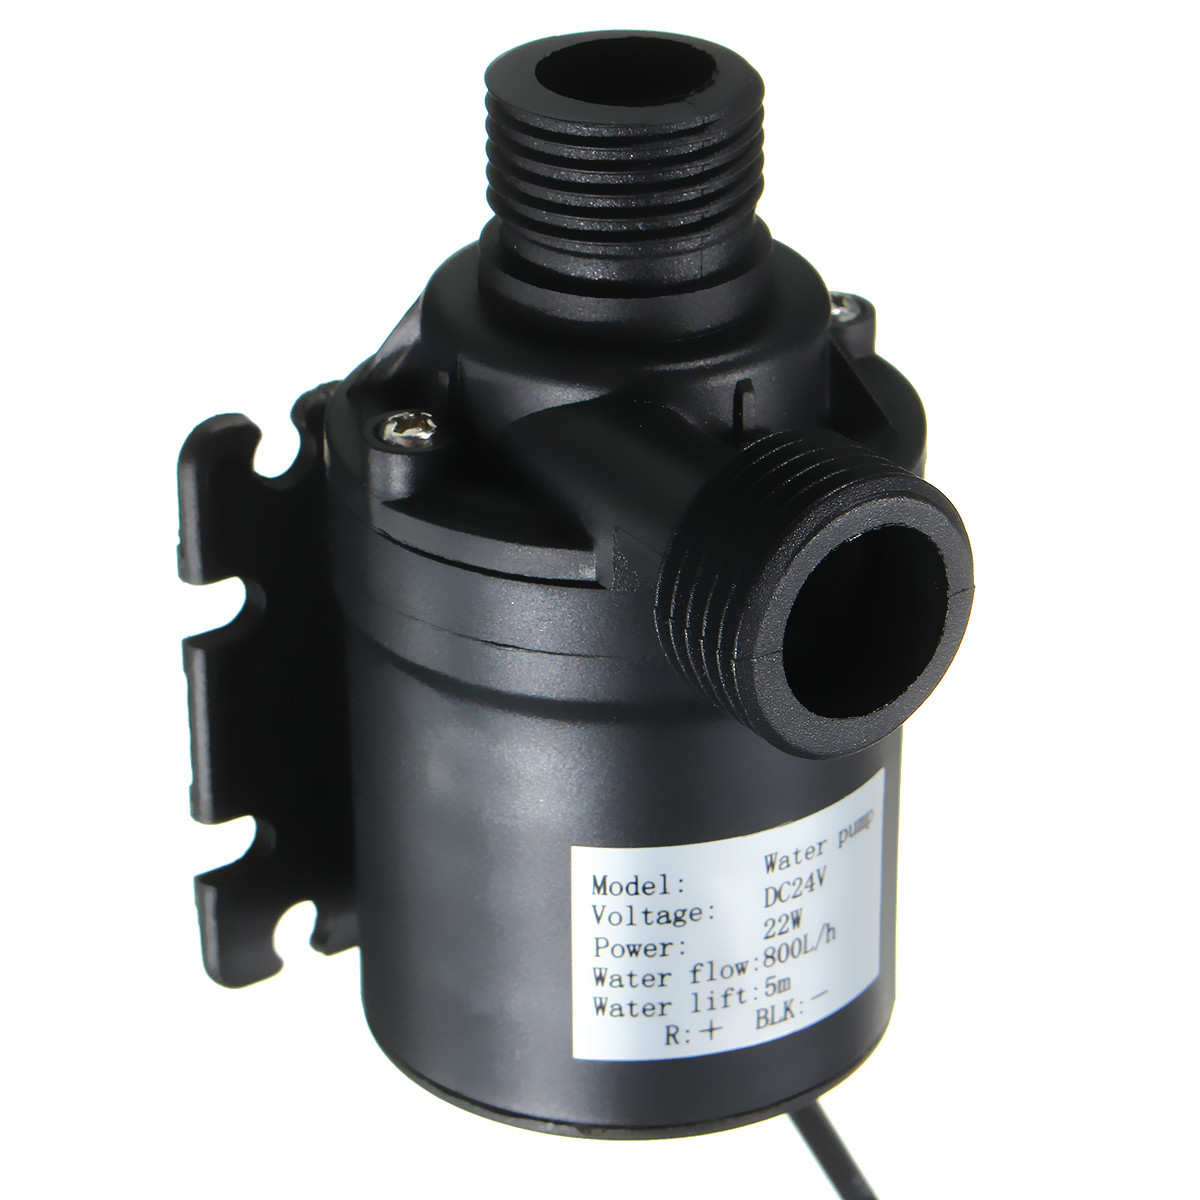 DC-24V-800LH-19W-5m-Lift-Mini-Quiet-Brushless-Motor-Submersible-Water-Pump-With-4mm-Threaded-Port-1100573-5